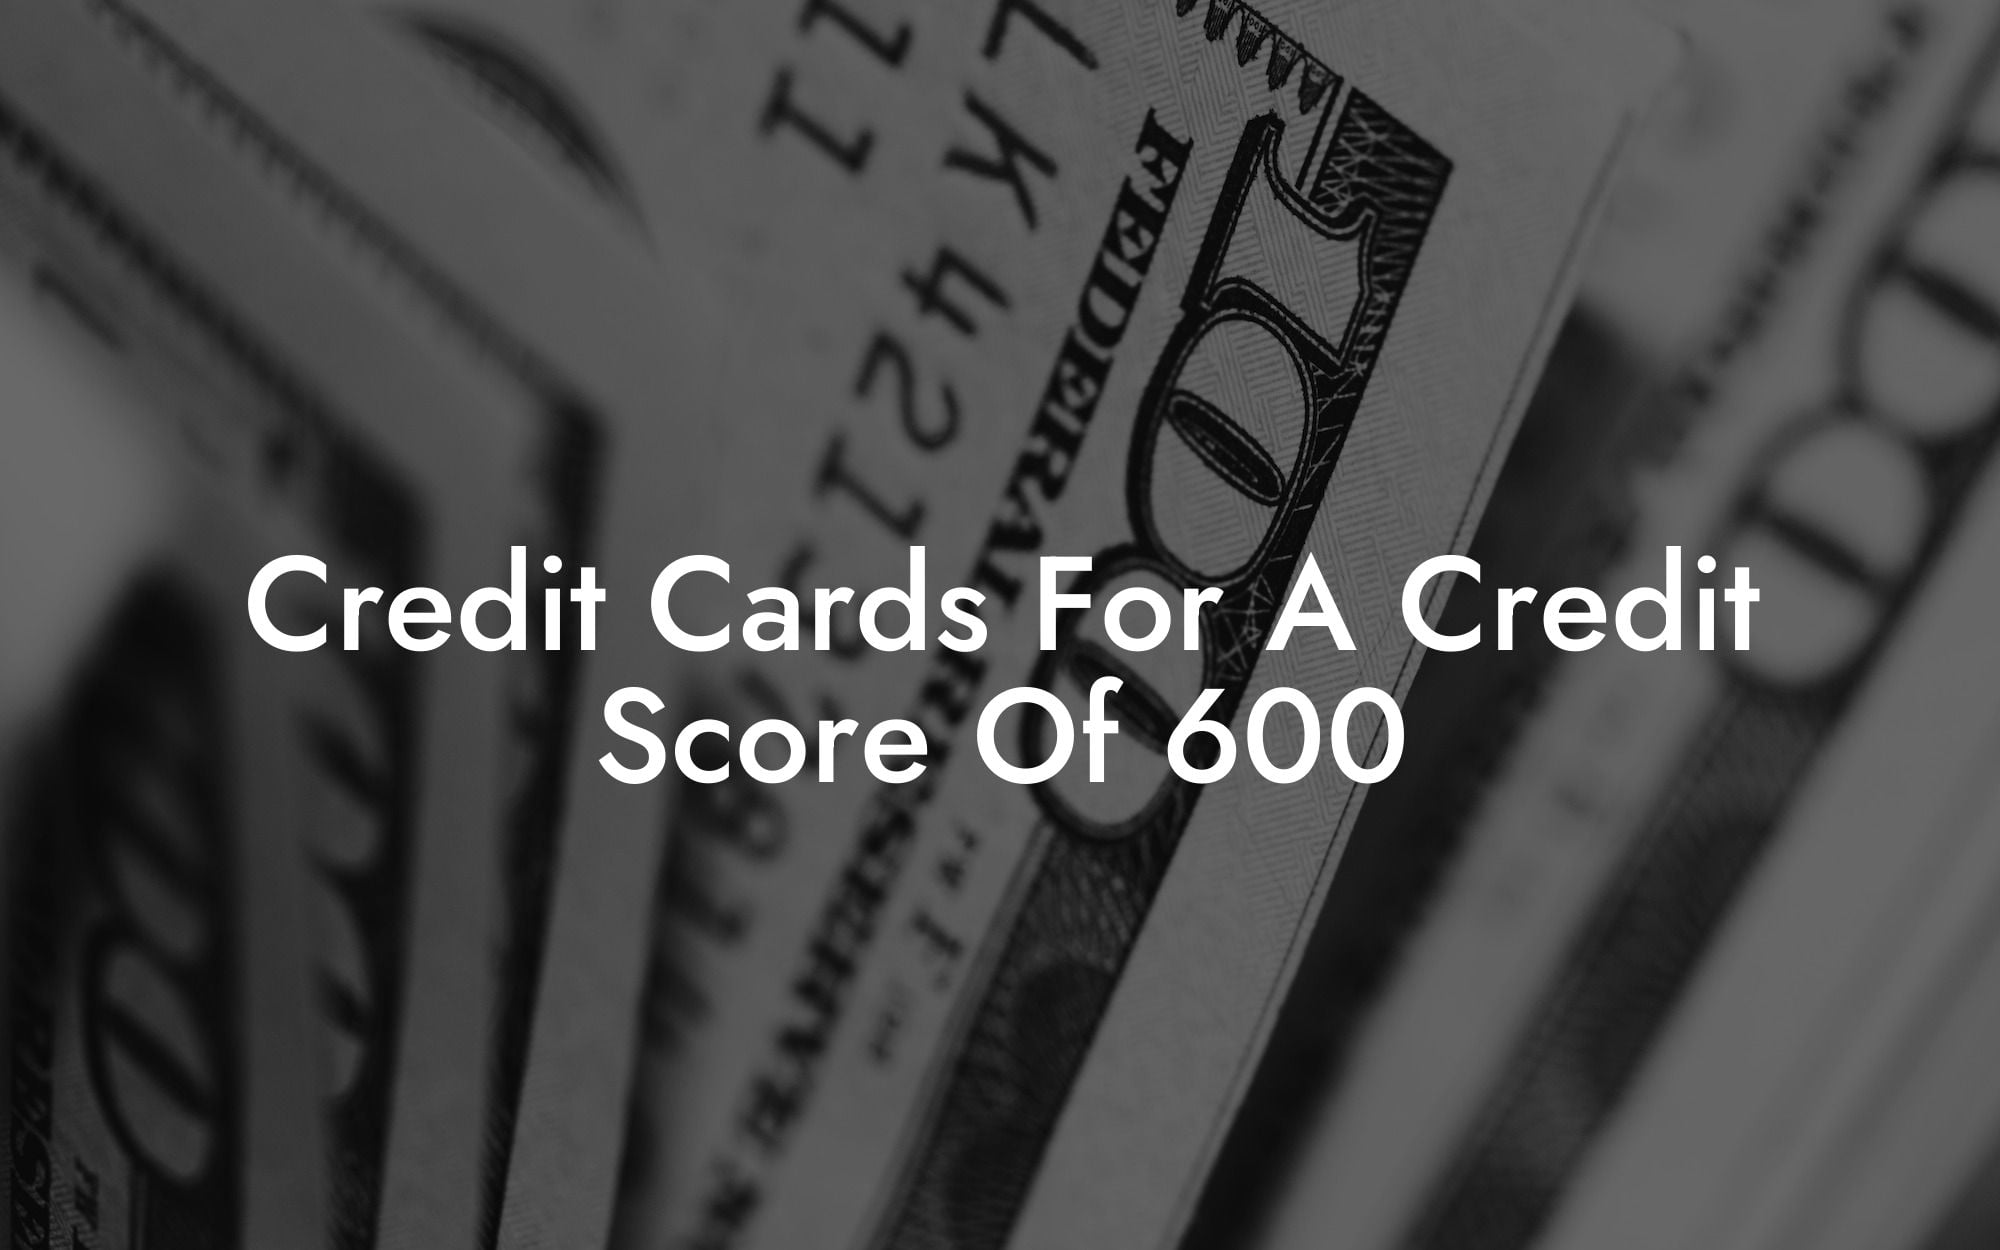 Credit Cards For A Credit Score Of 600